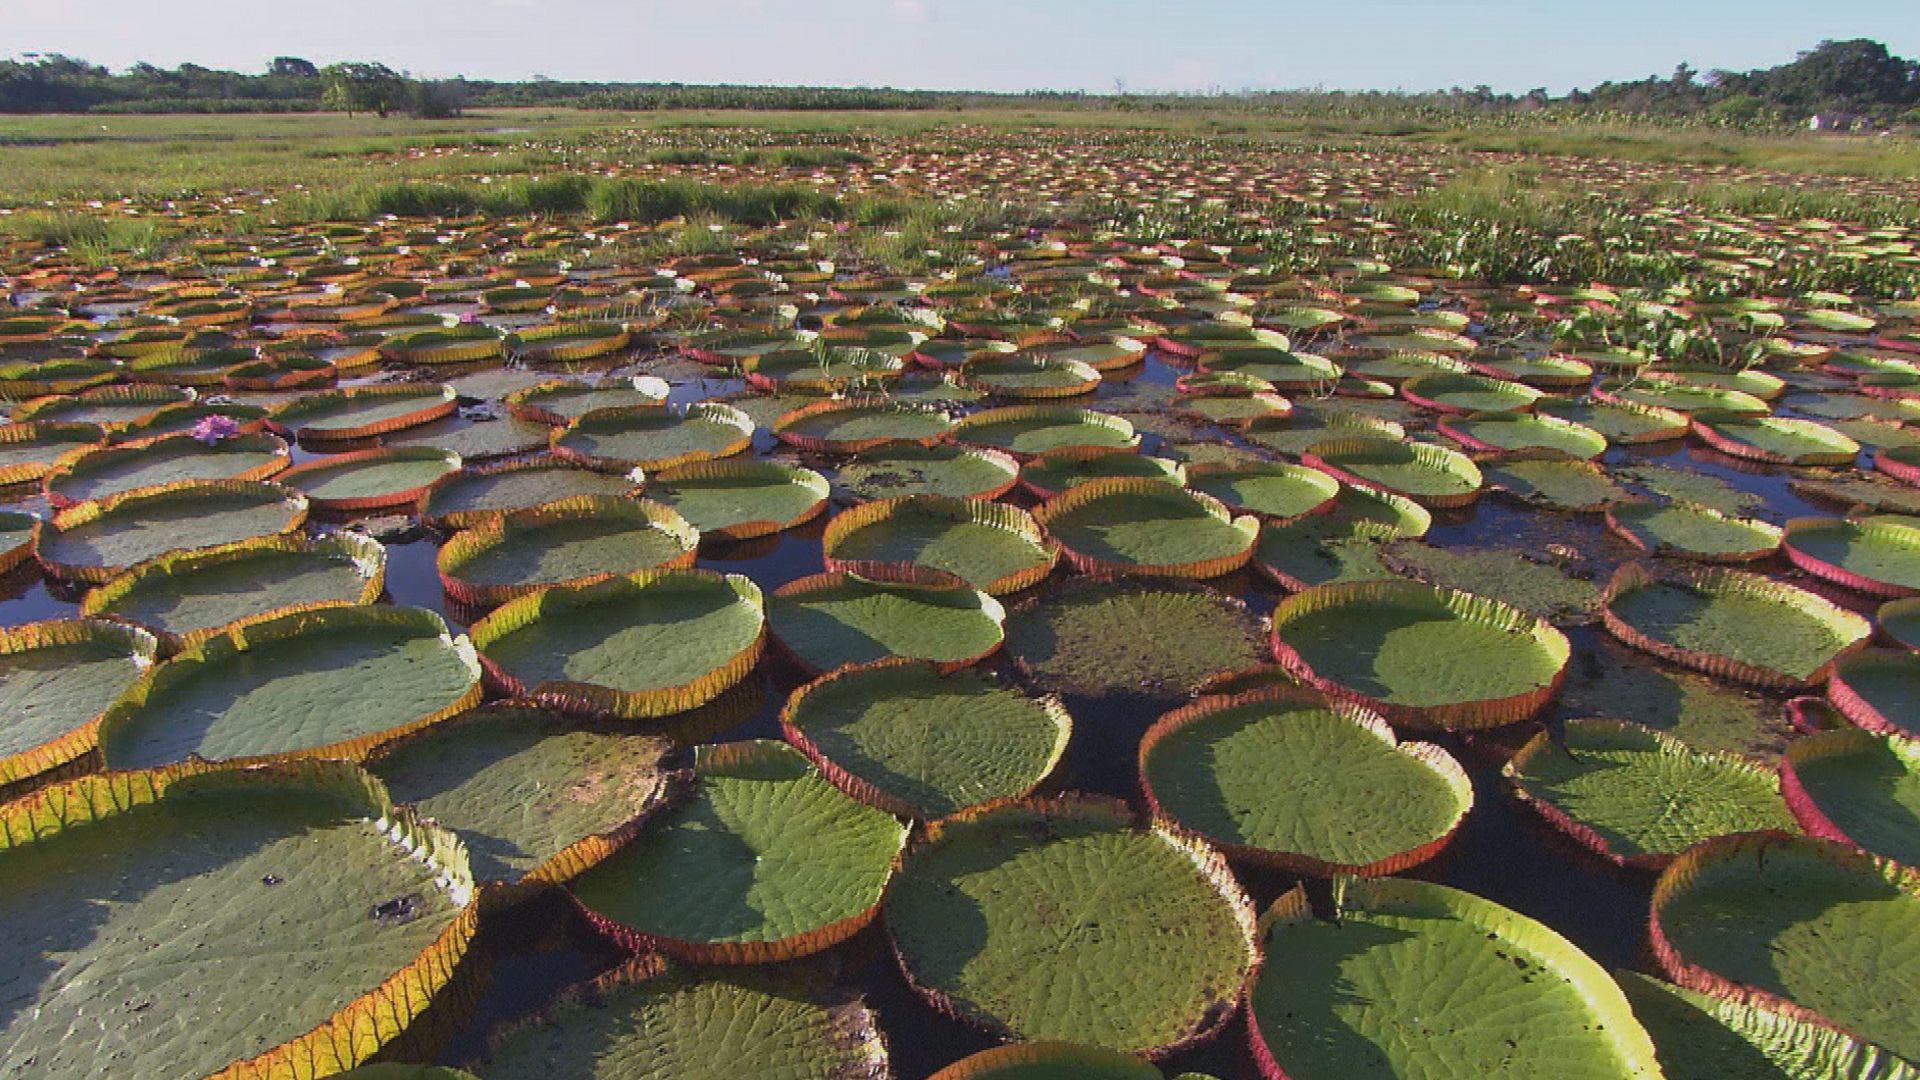 Queen Victoria water lillies carpet the floodplain. They can reach over six feet in diameter.... [Photo of the day - July 2020]